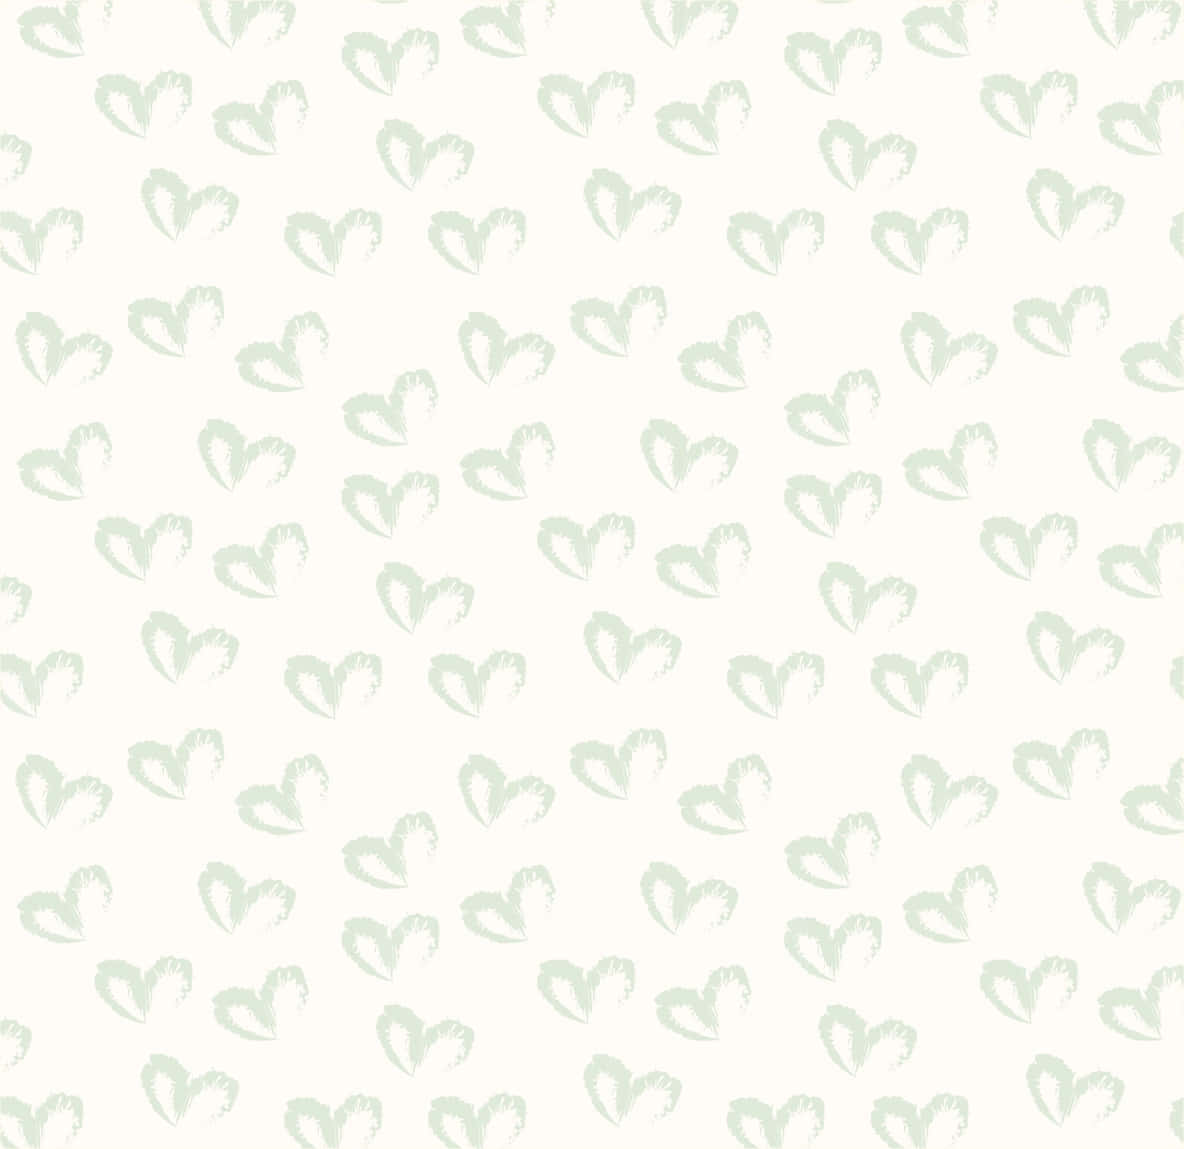 A Green And White Pattern With Hearts